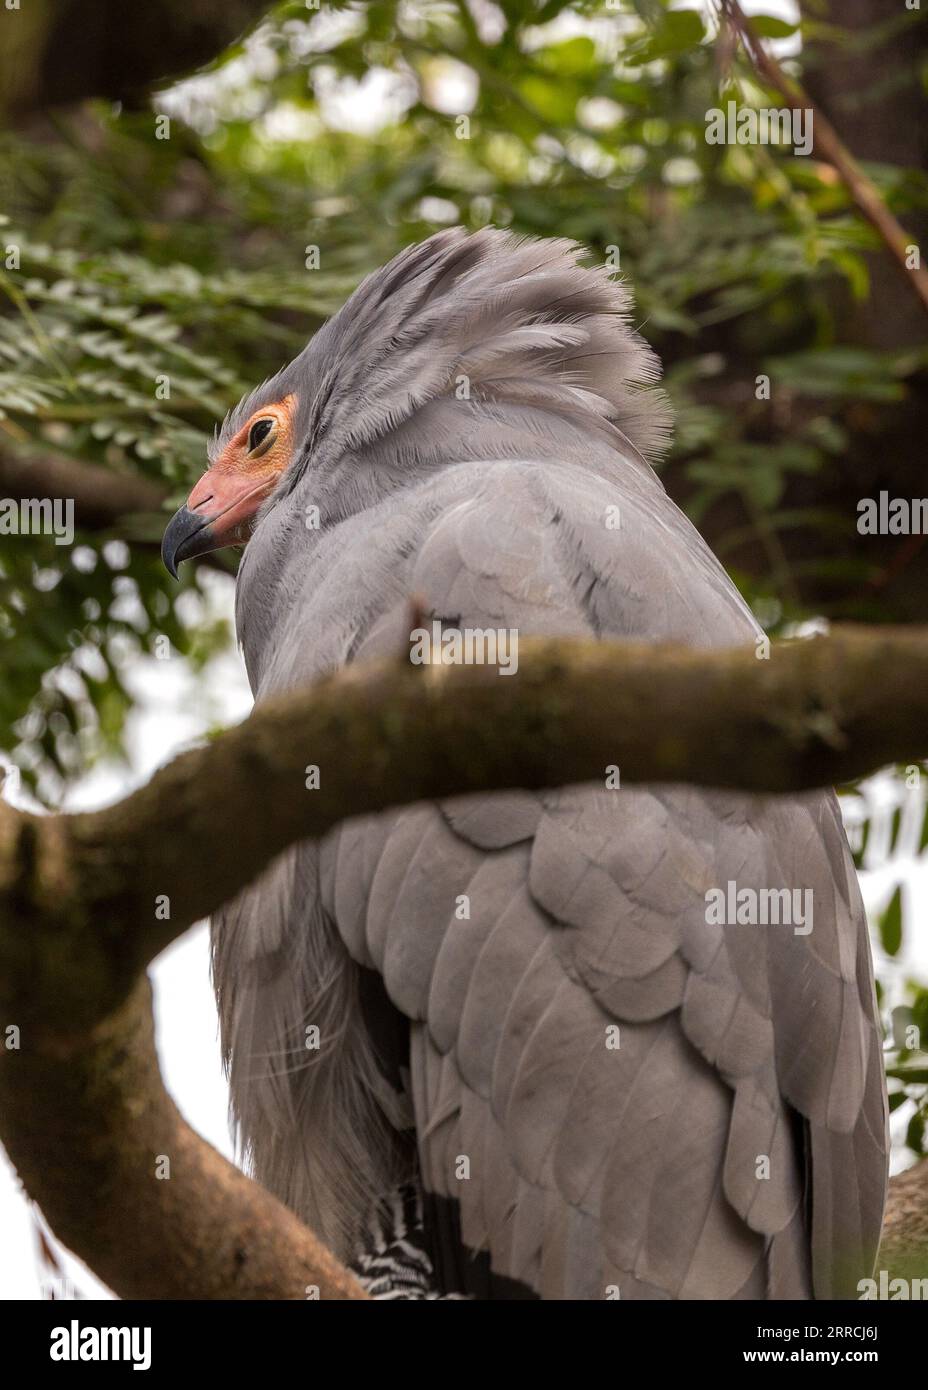 The African Harrier Hawk, also known as Gymnogene, is a majestic raptor found in Sub-Saharan Africa. With its striking plumage, powerful beak, and agi Stock Photo